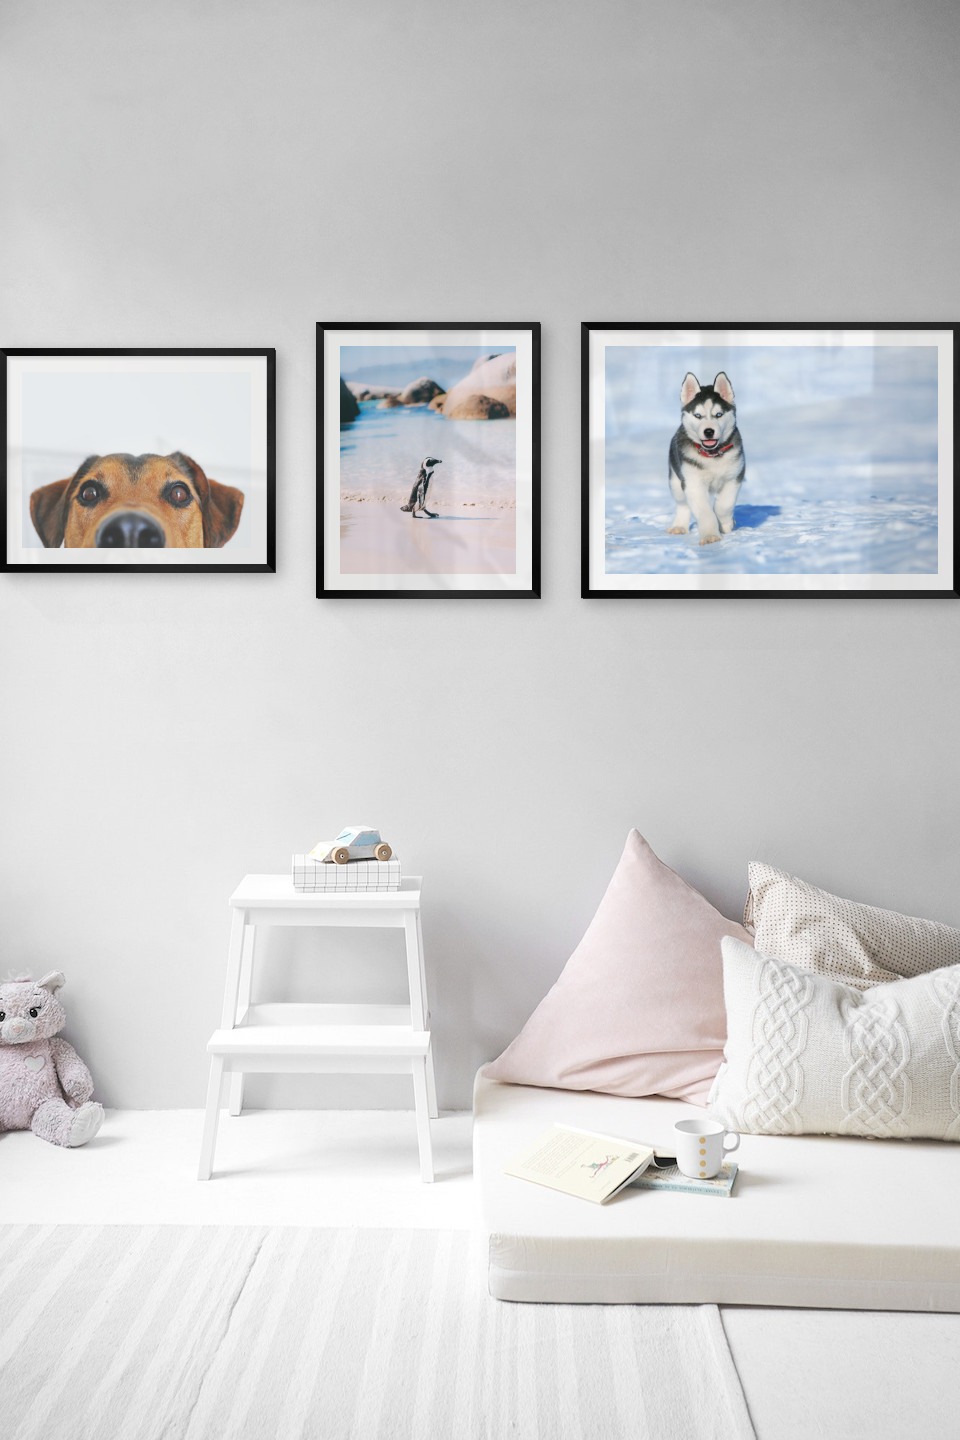 Gallery wall with picture frames in black in sizes 40x50 and 50x70 with prints "Hundnos", "Penguin on the beach" and "Husky"